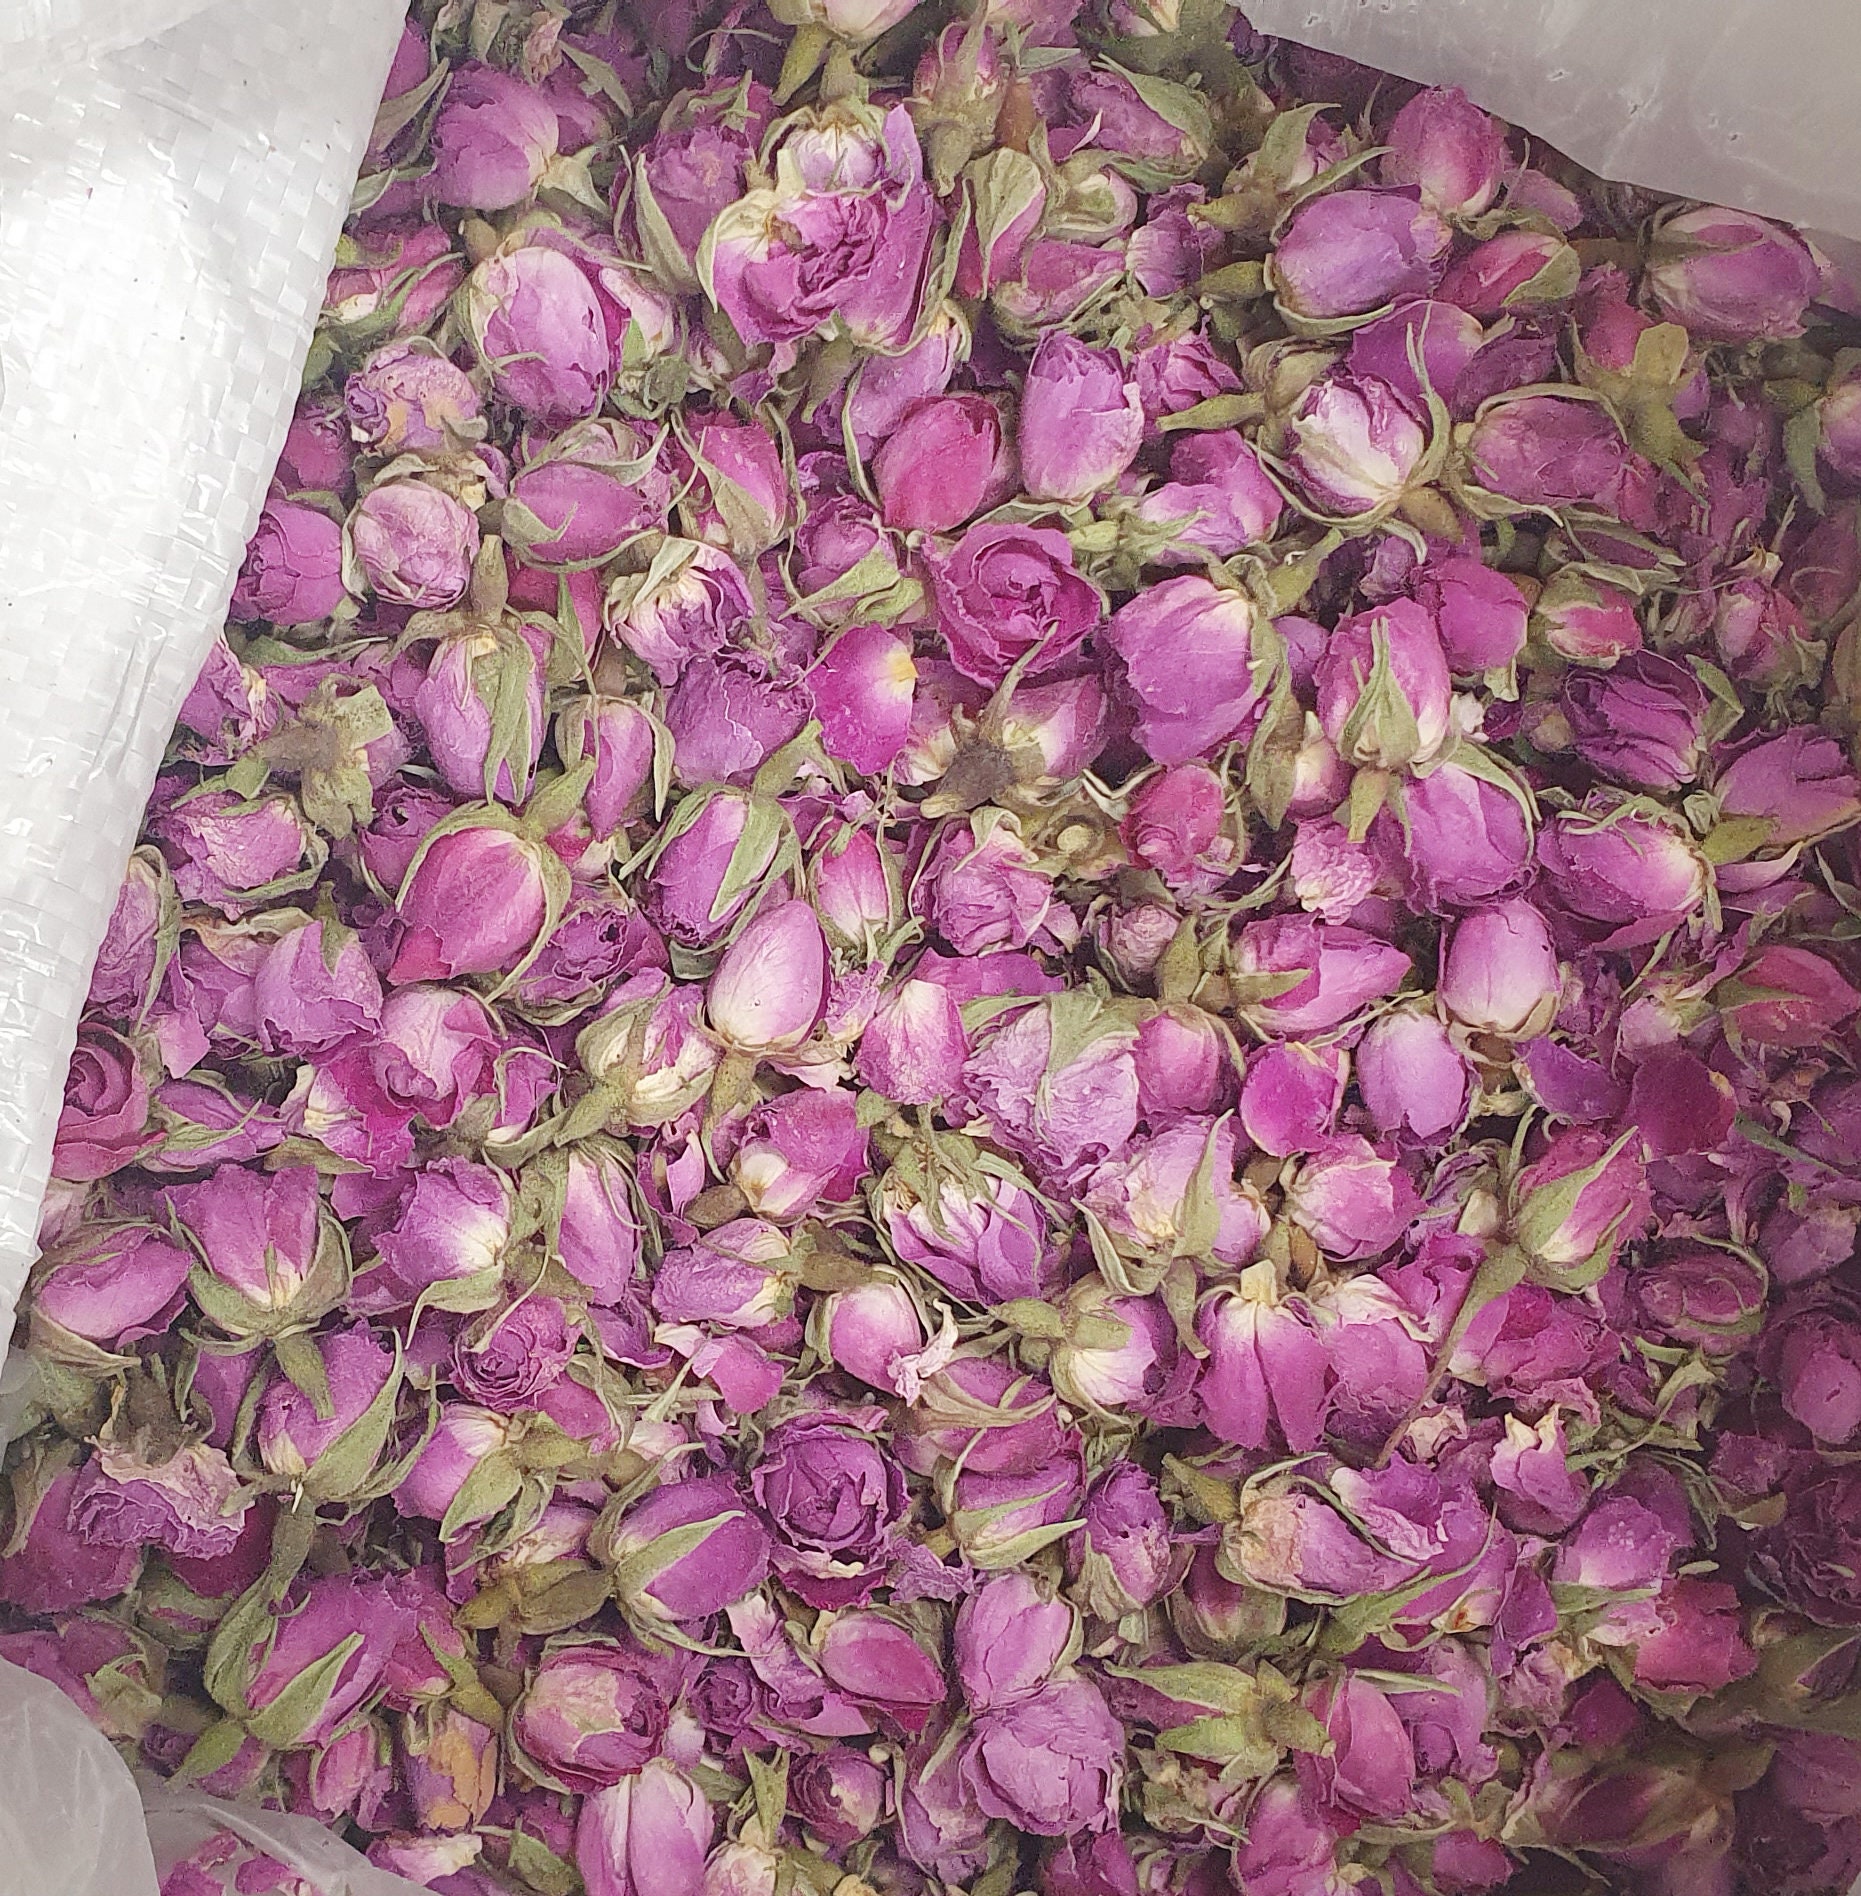 Rose Buds 50G Whole Dried Rose Buds DARK PINK Premium Natural Dried Flowers,  Rose Petal CRAFT Tea Soap Oil Cosmetic Supply 